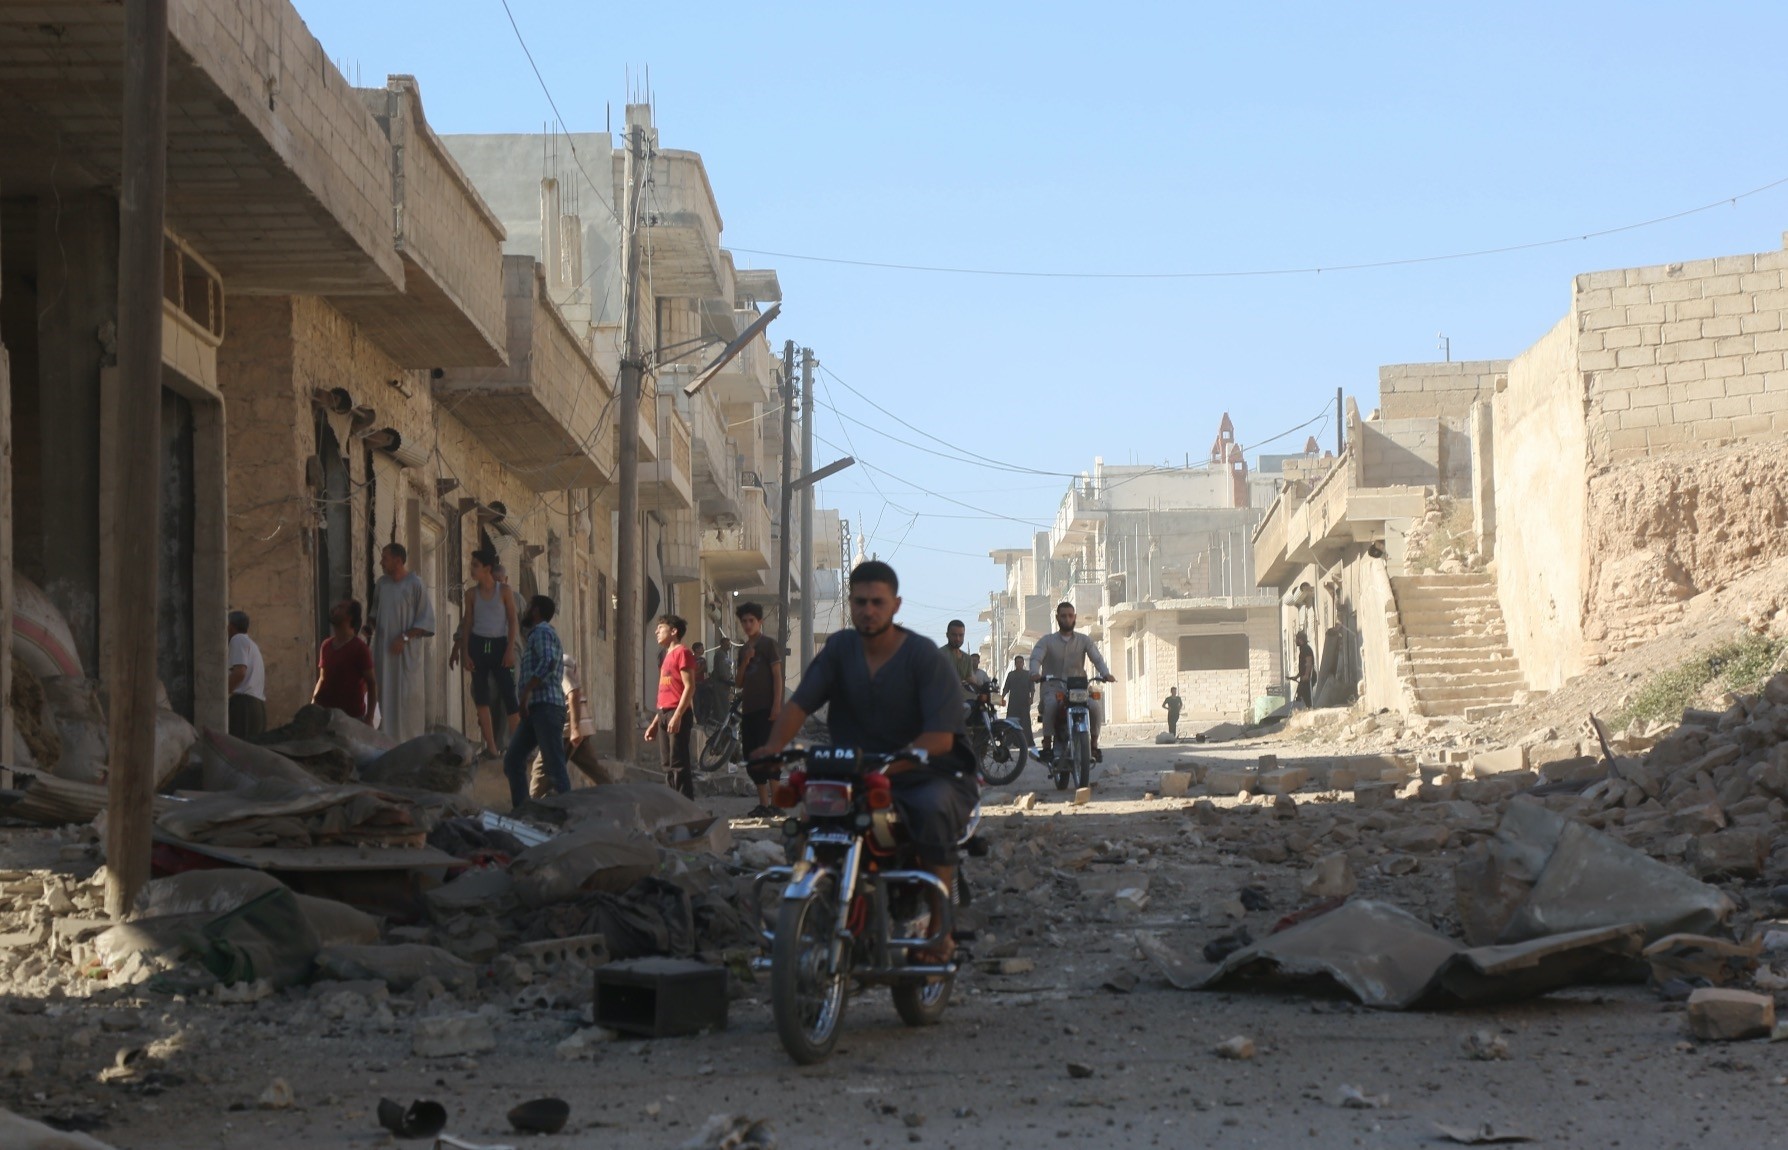 Sochi deal agreed in September 2018 to establish a demilitarized zone in Idlib in order to decrease tension caused by regime attacks and prevent a new conflict in the province.